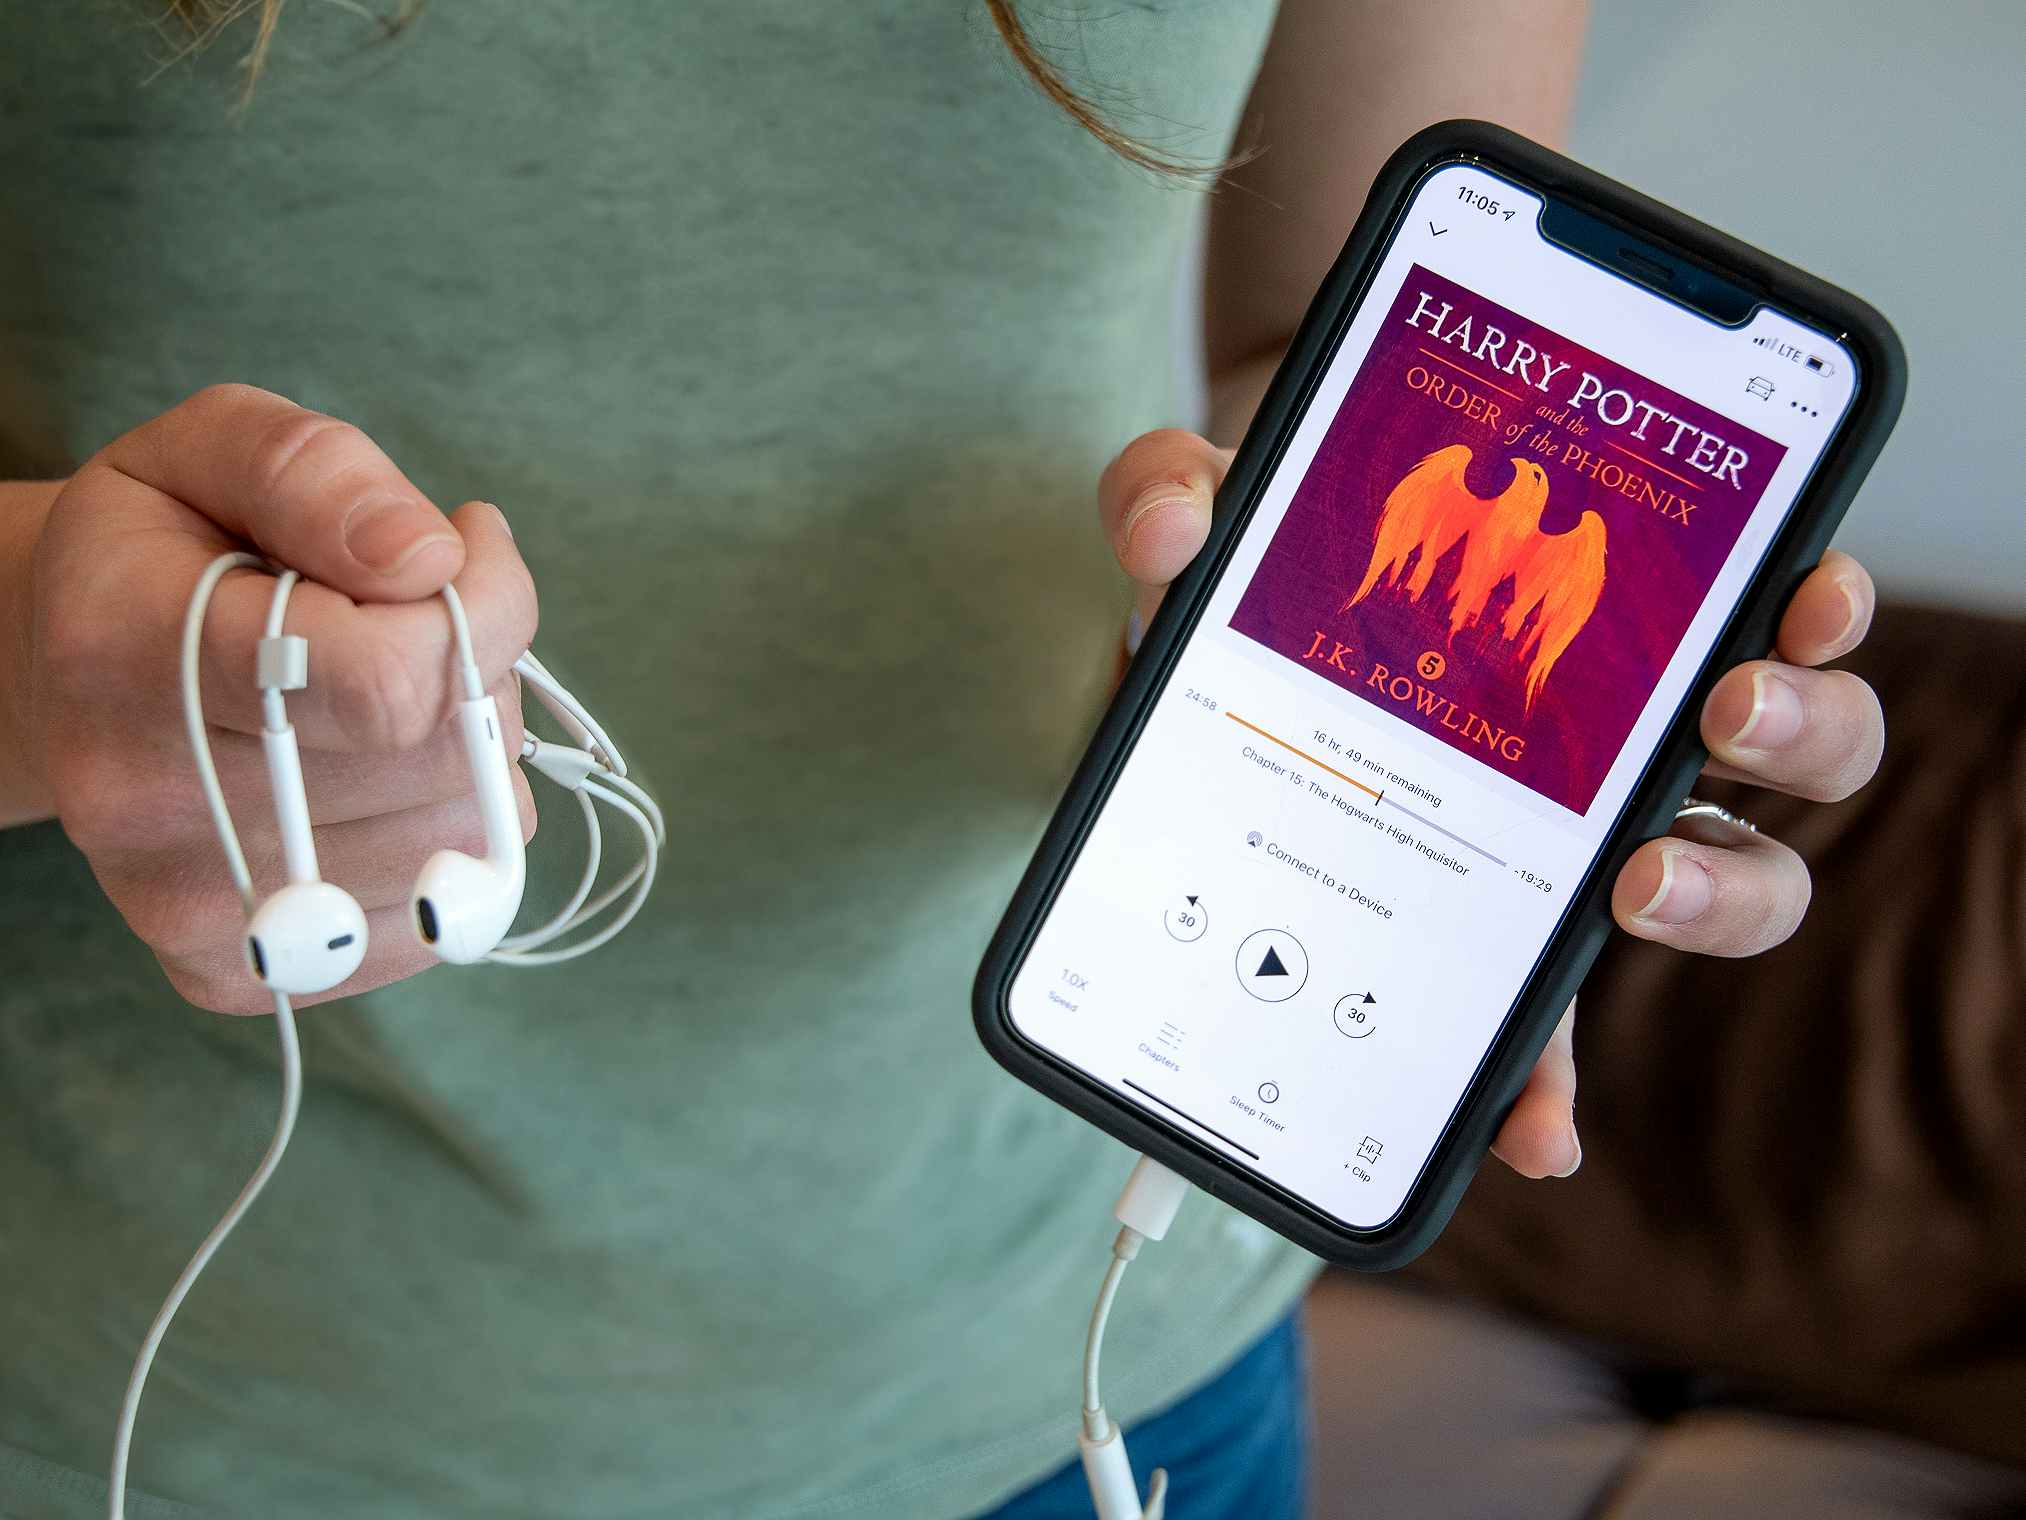 A person holding an iPhone and headphones with Harry Potter and the Order of the Phoenix from audible on the screen